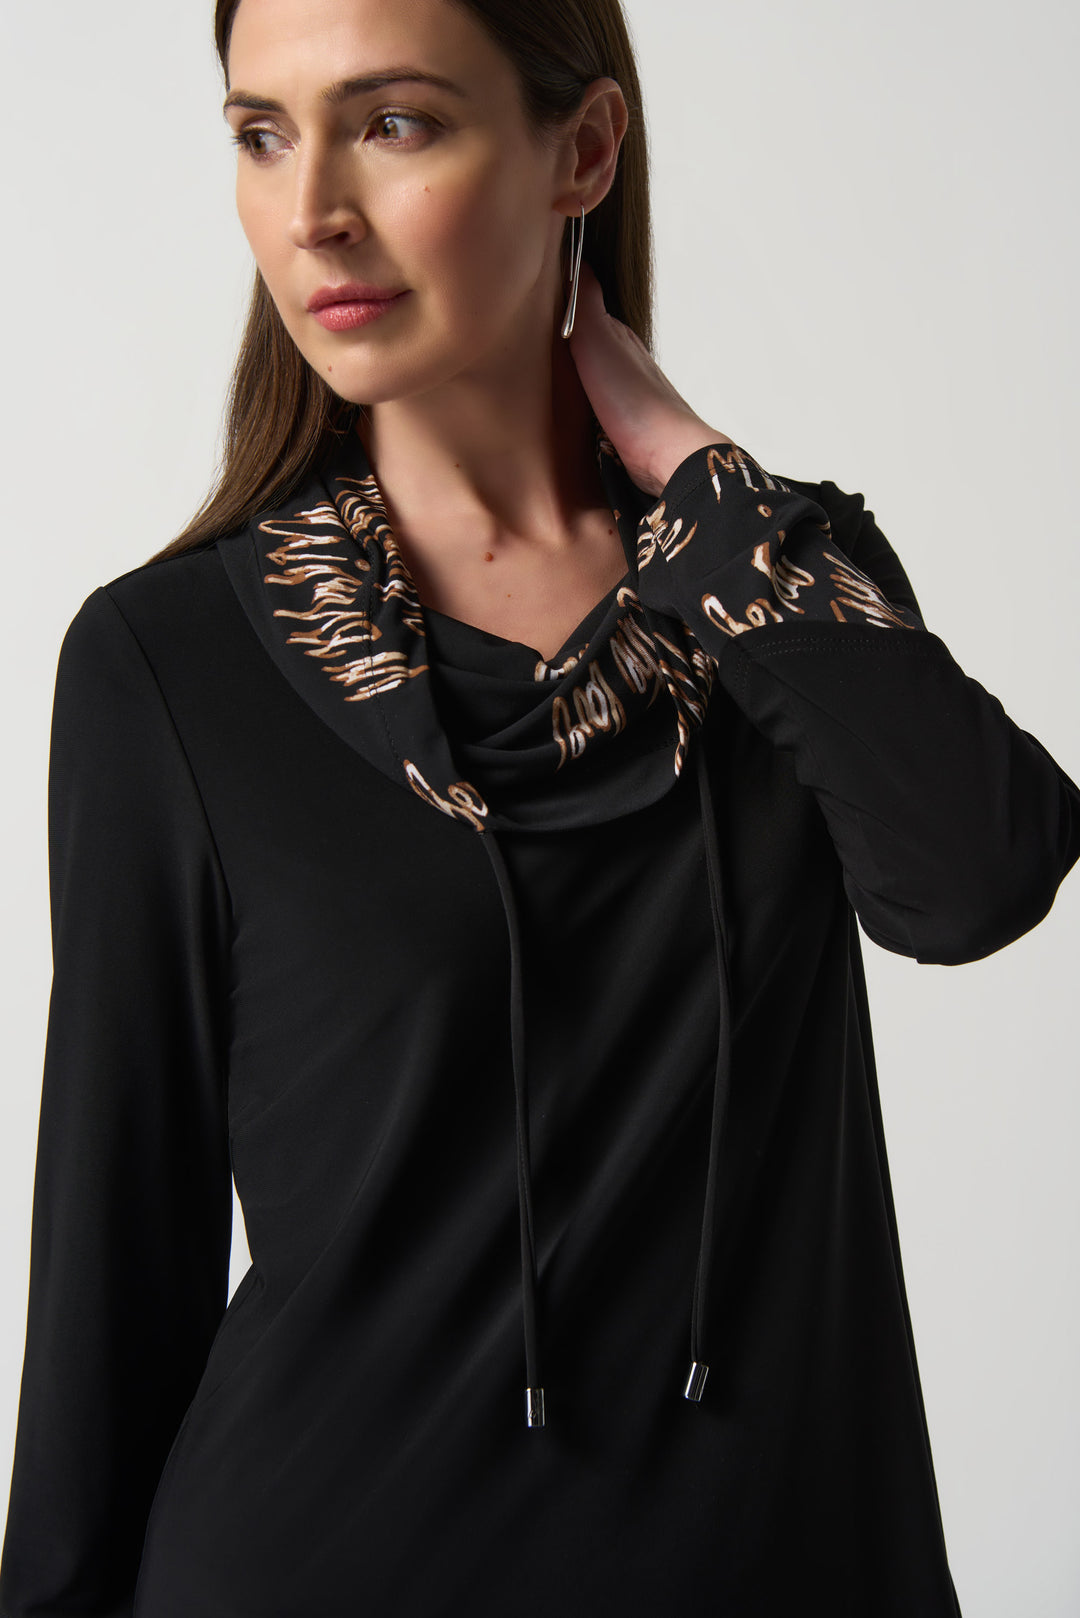 COWL NECK TOP WITH WORDING